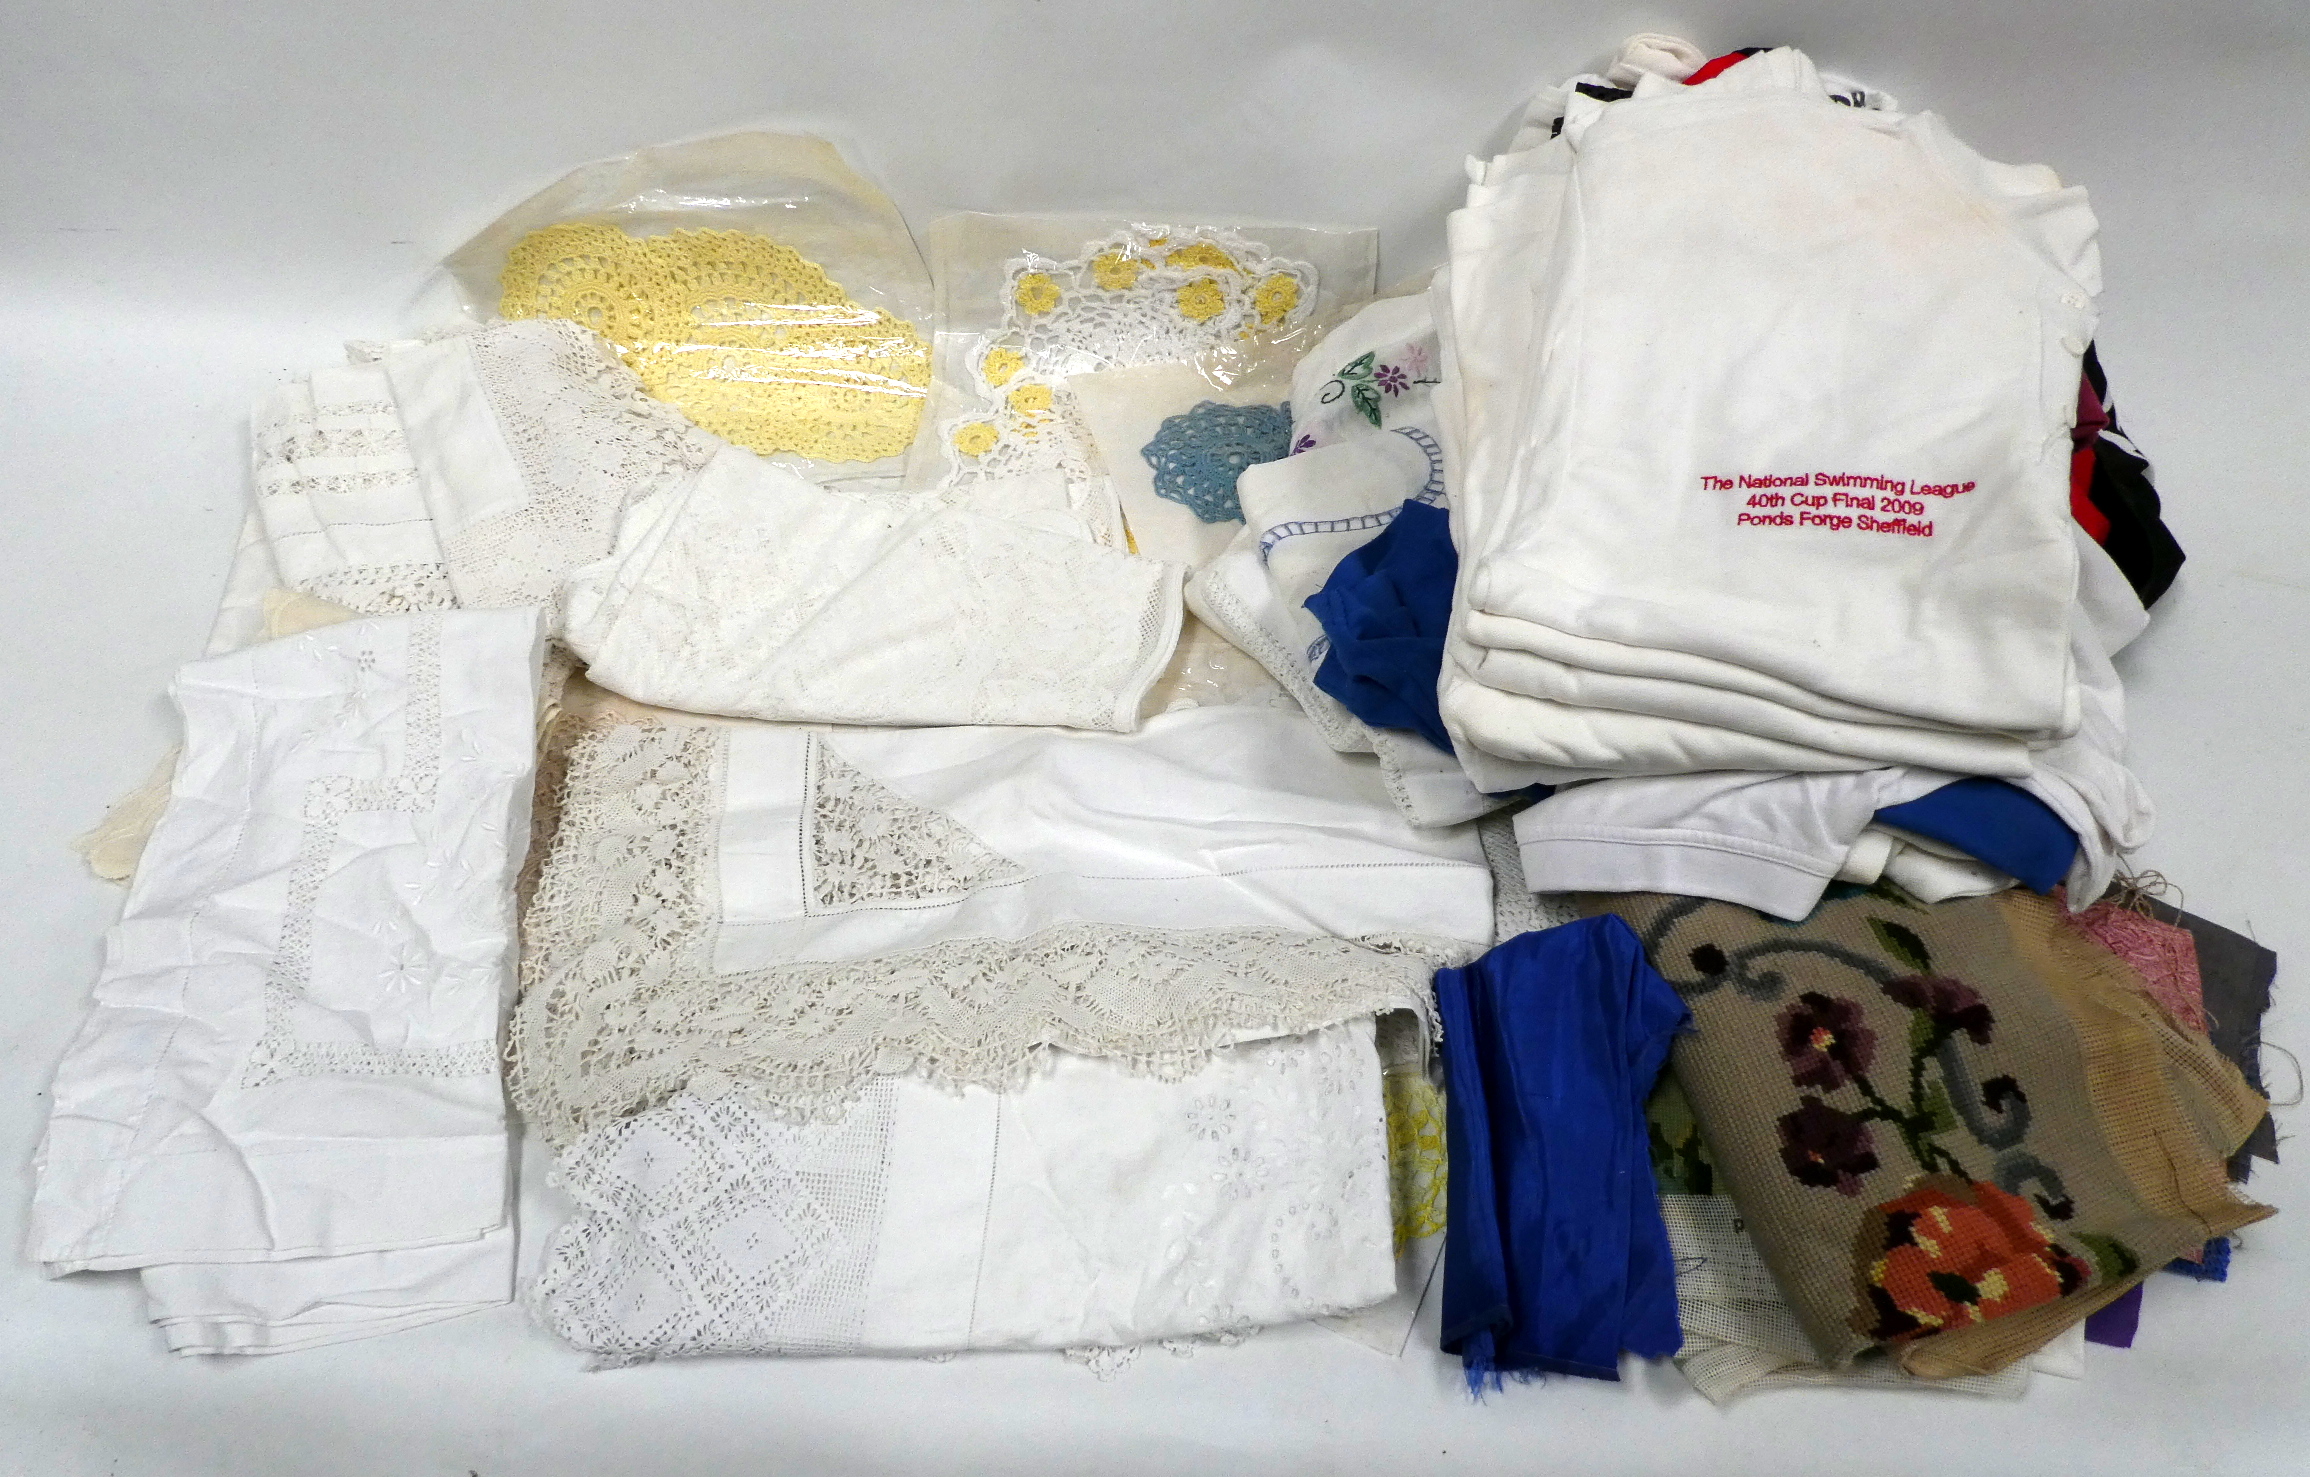 A quantity of 20th century lace and white-ware - together with a quantity of embroidered items. (